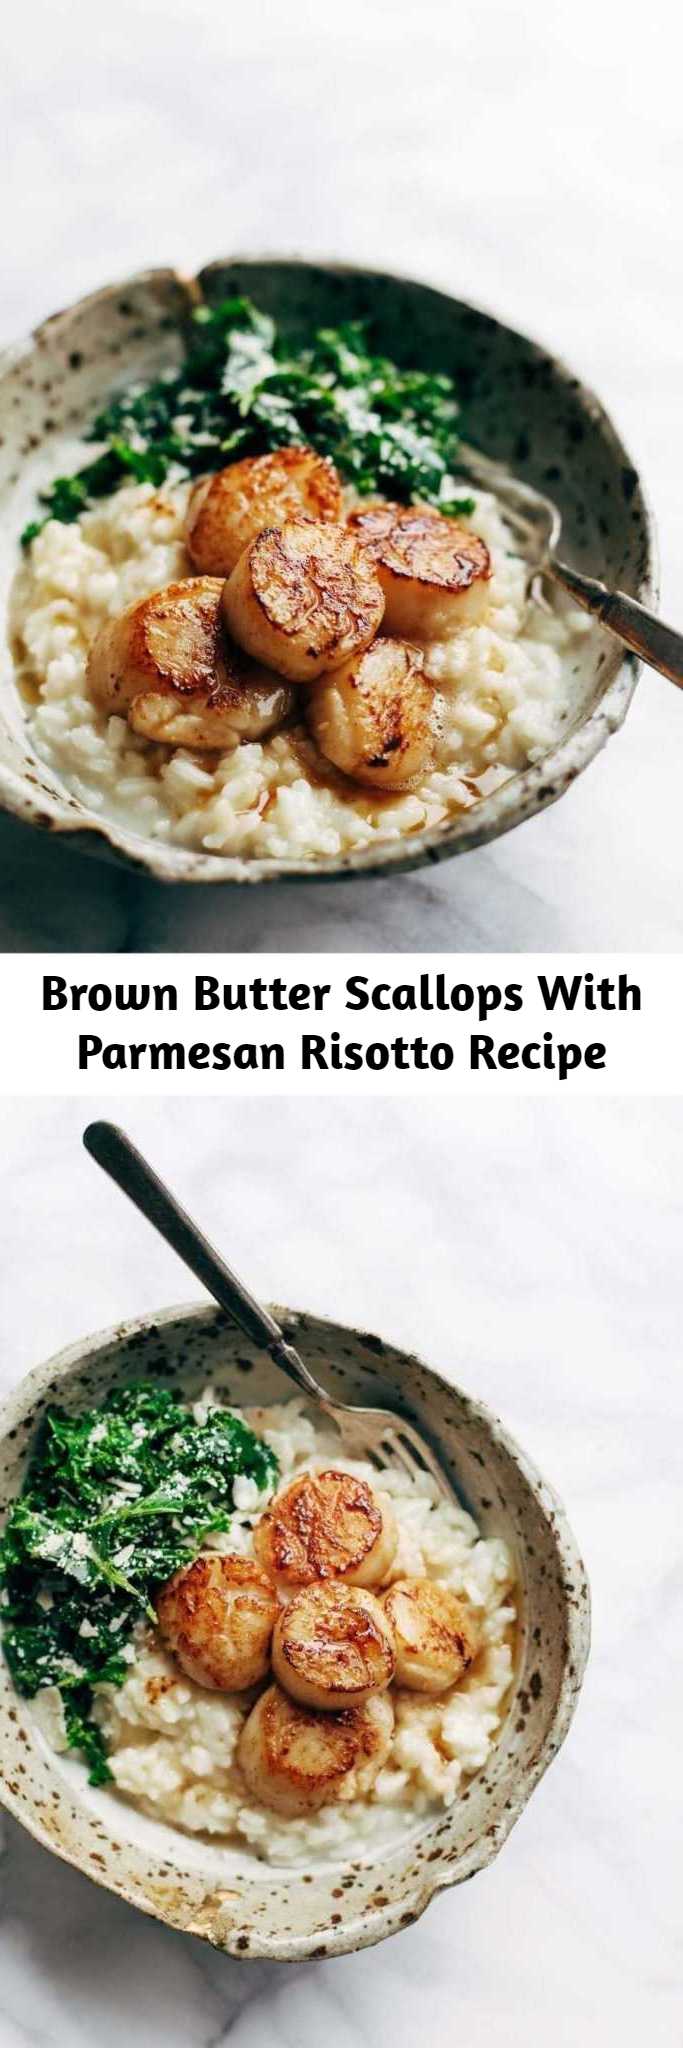 Brown Butter Scallops With Parmesan Risotto Recipe - Brown Butter Scallops with Parmesan Risotto! So Luscious! So Fancy! A cozy, romantic recipe that feels like a fancy restaurant meal at home!. Say hello to this delicious meal!